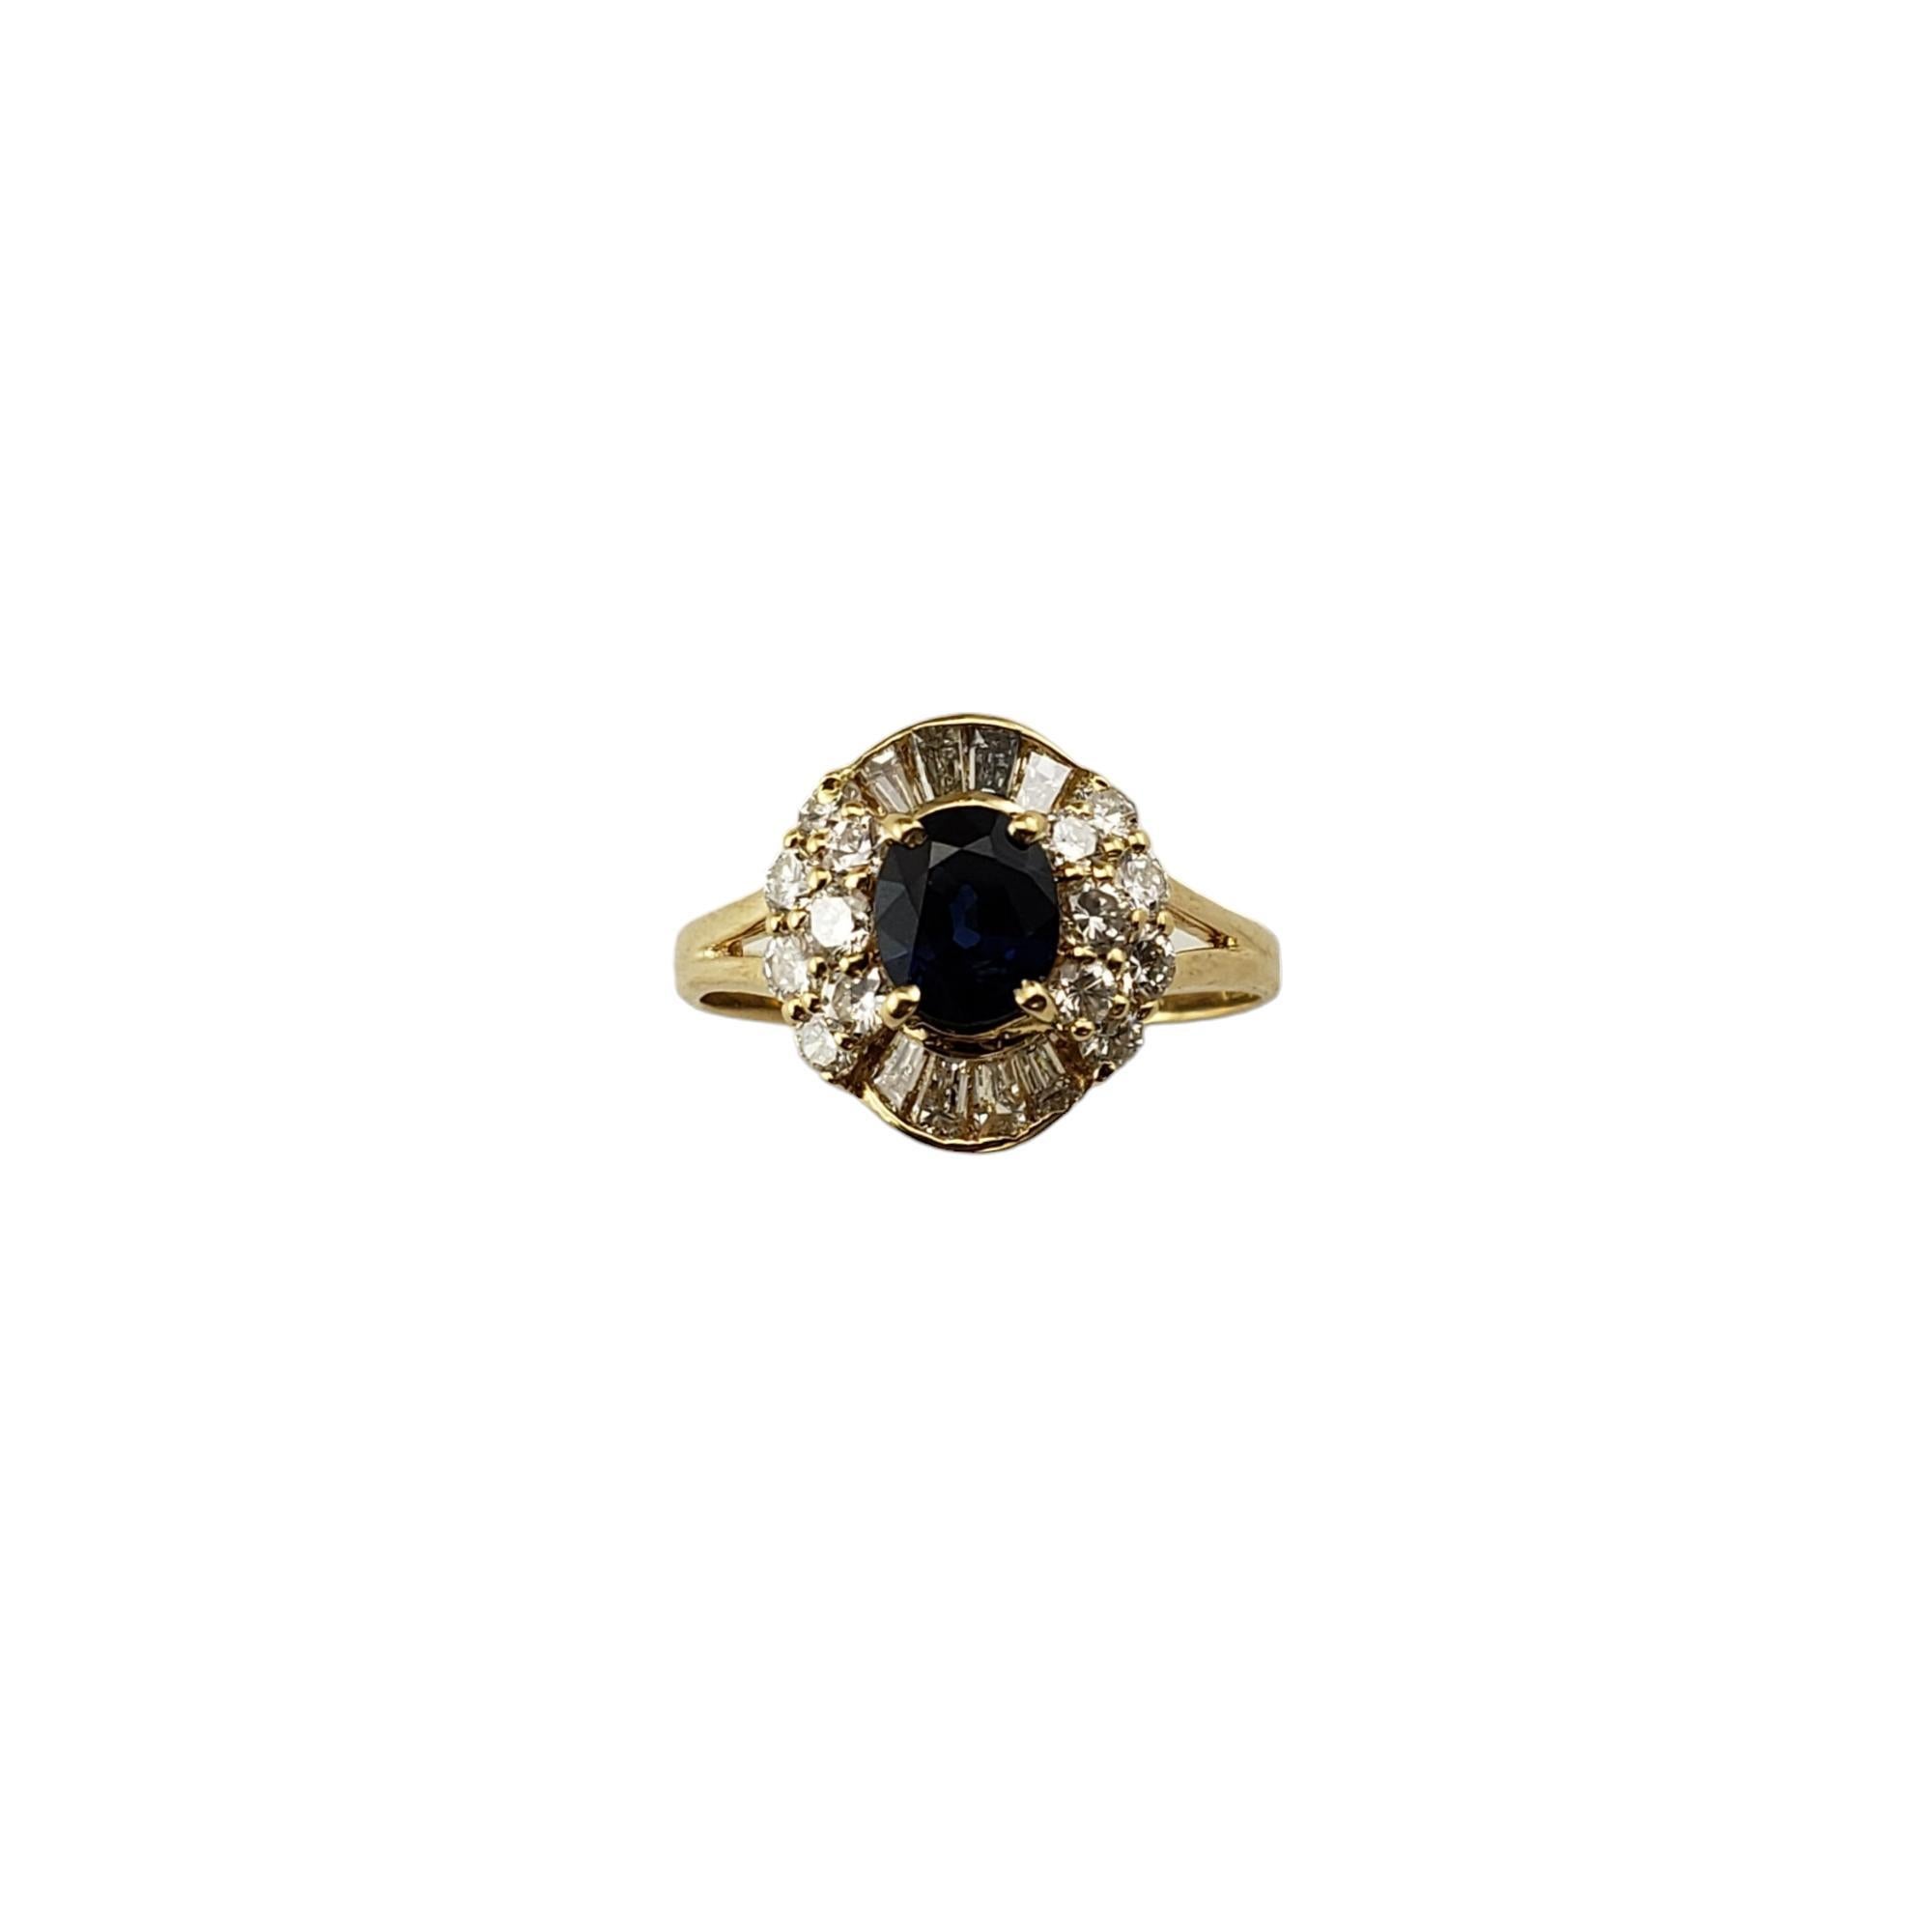 18K Yellow Gold Sapphire and Diamond Ring Size 7.5 #15912